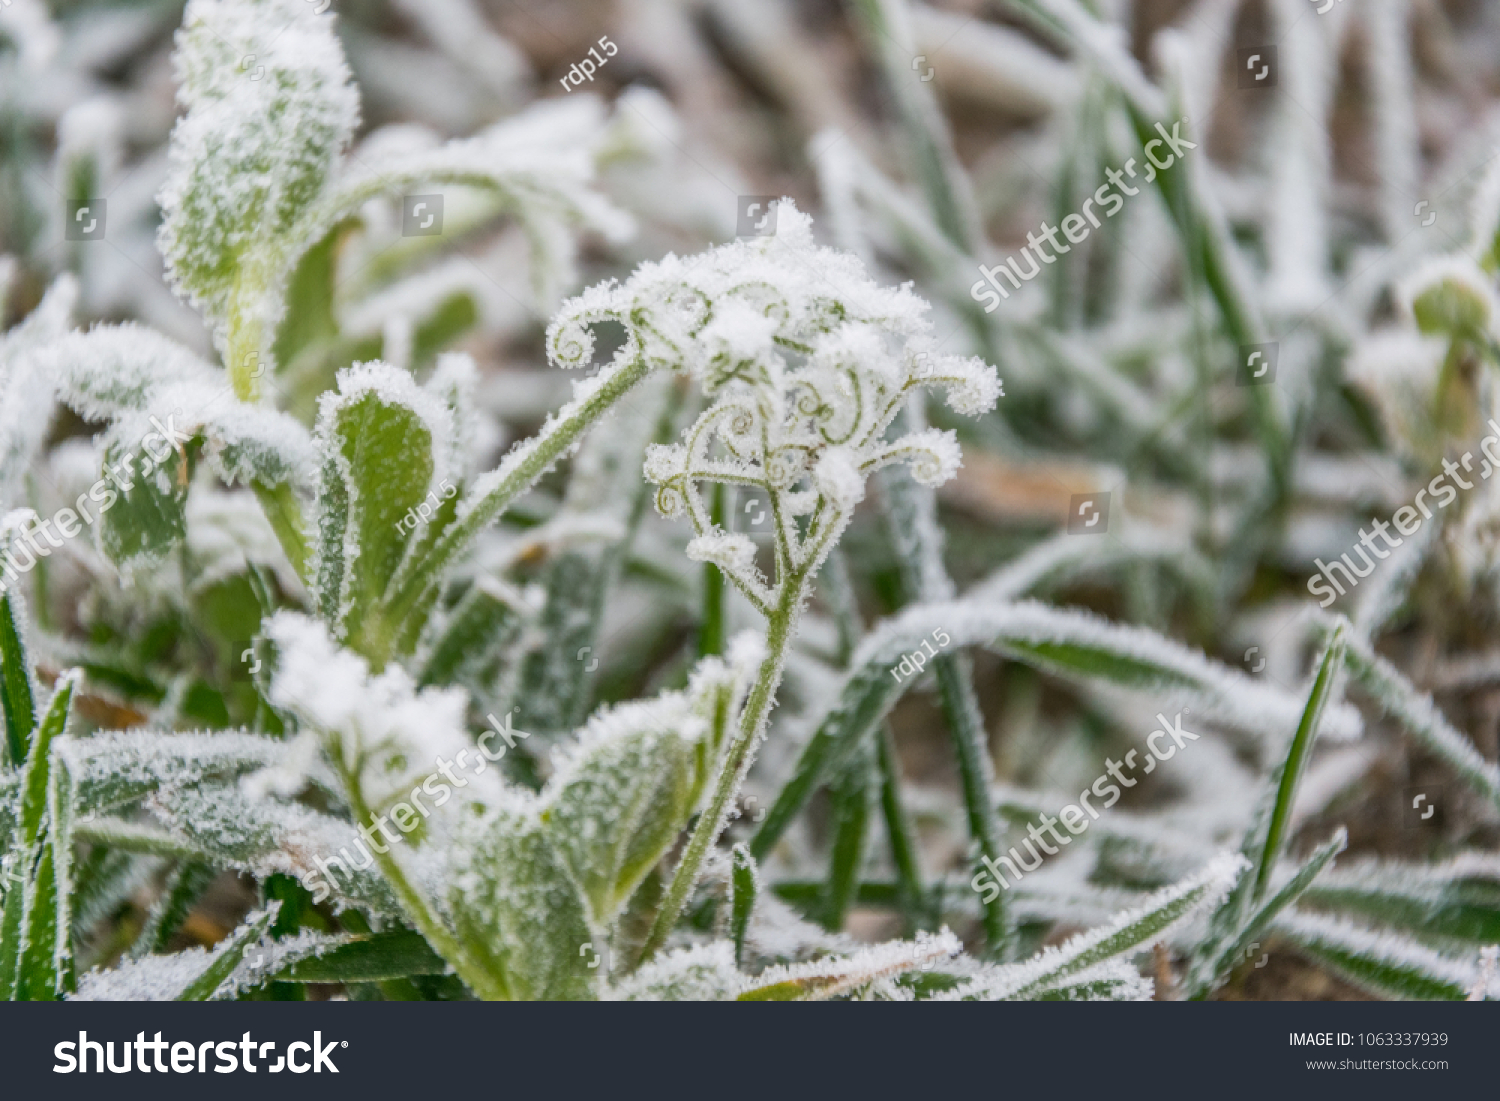 Winter nature covered in hoar frost. Winter nature covered freezing ice cristalls.  #1063337939